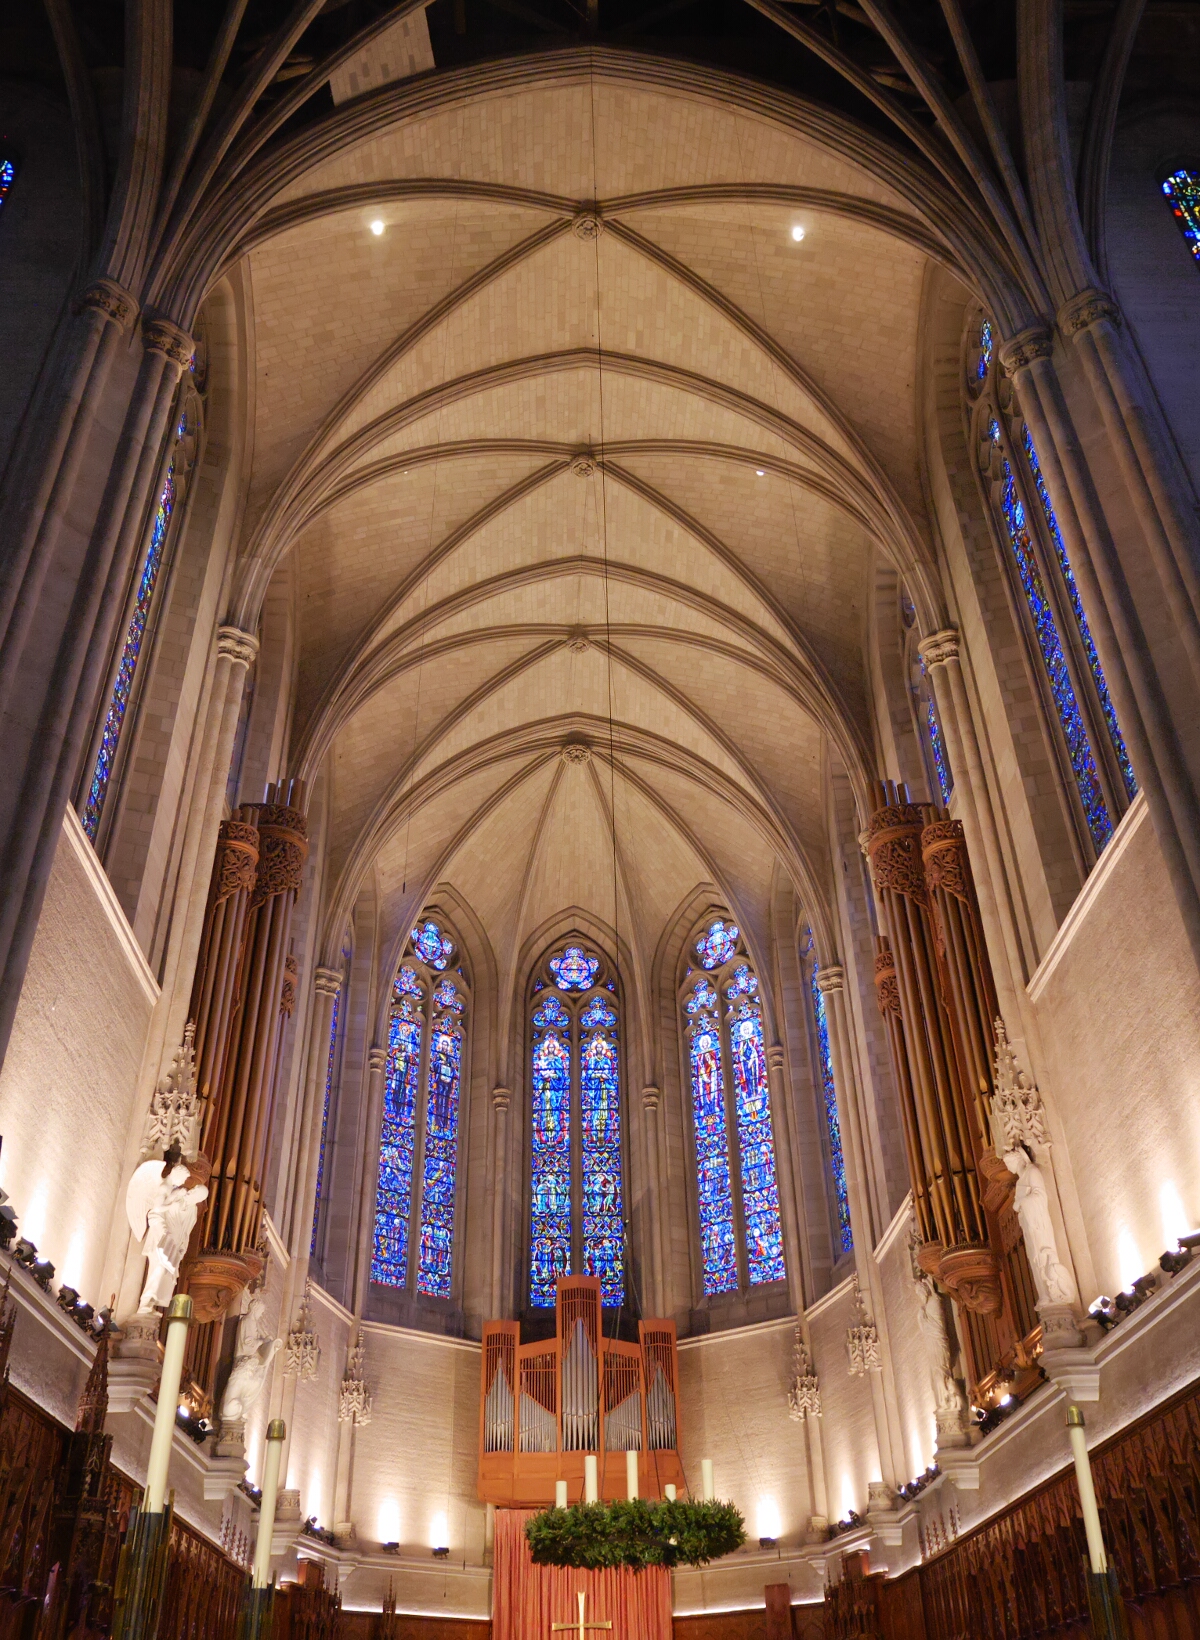 The apse of Grace Cathedral.